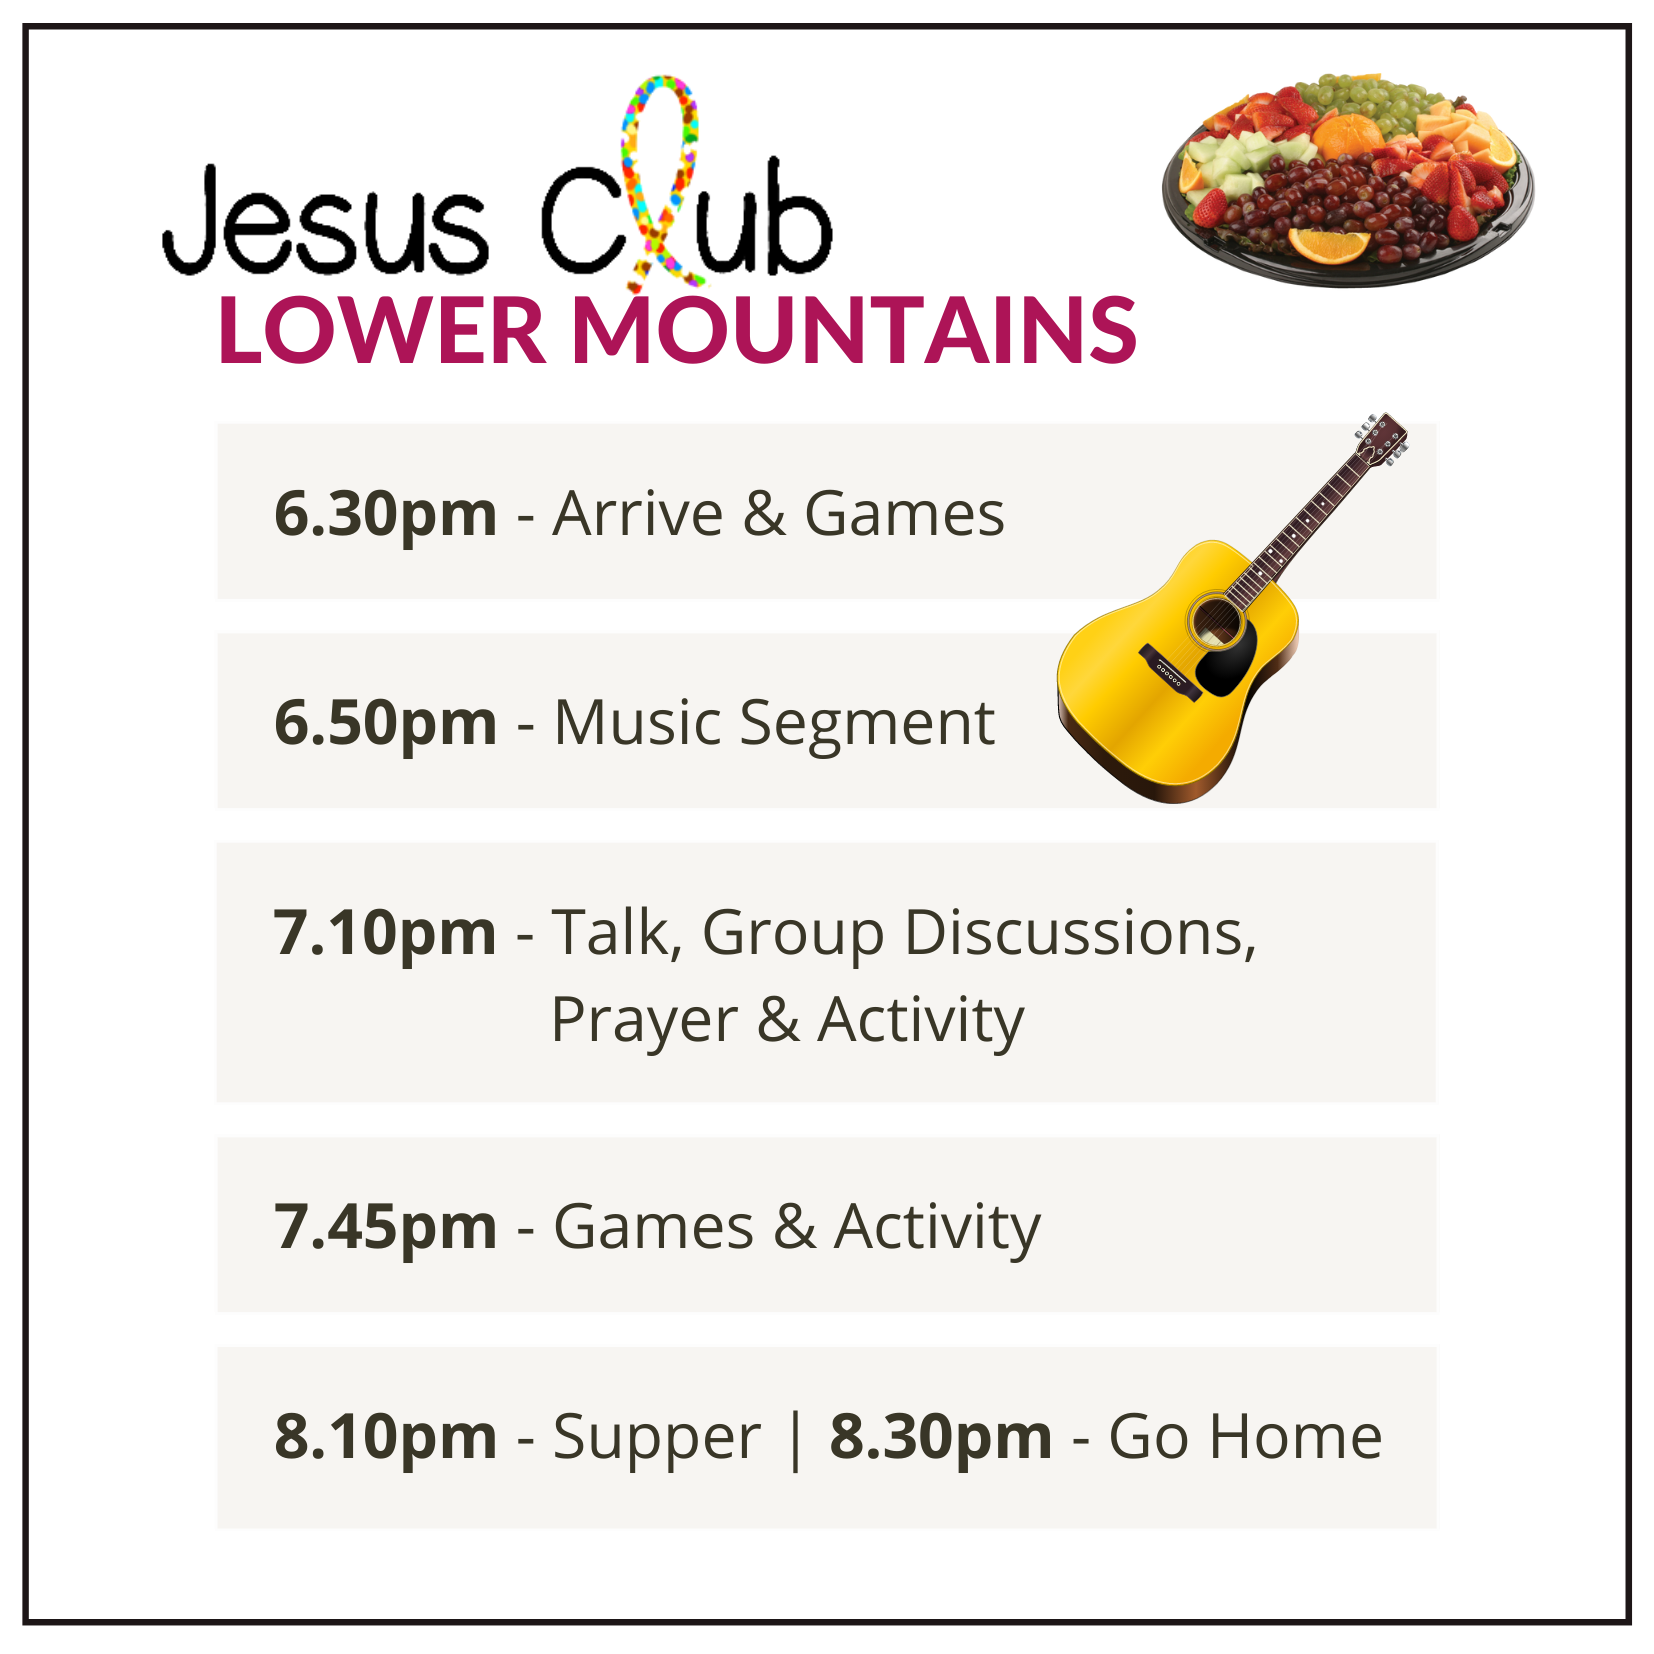 Jesus Club Lower Mountains - 6.30 Arrive & Games - 6.50 Music - 7.10 Talk, Group Discussions, Prayer & Activity - 7.45 Games - 8.10 Supper - 8.30 Go Home